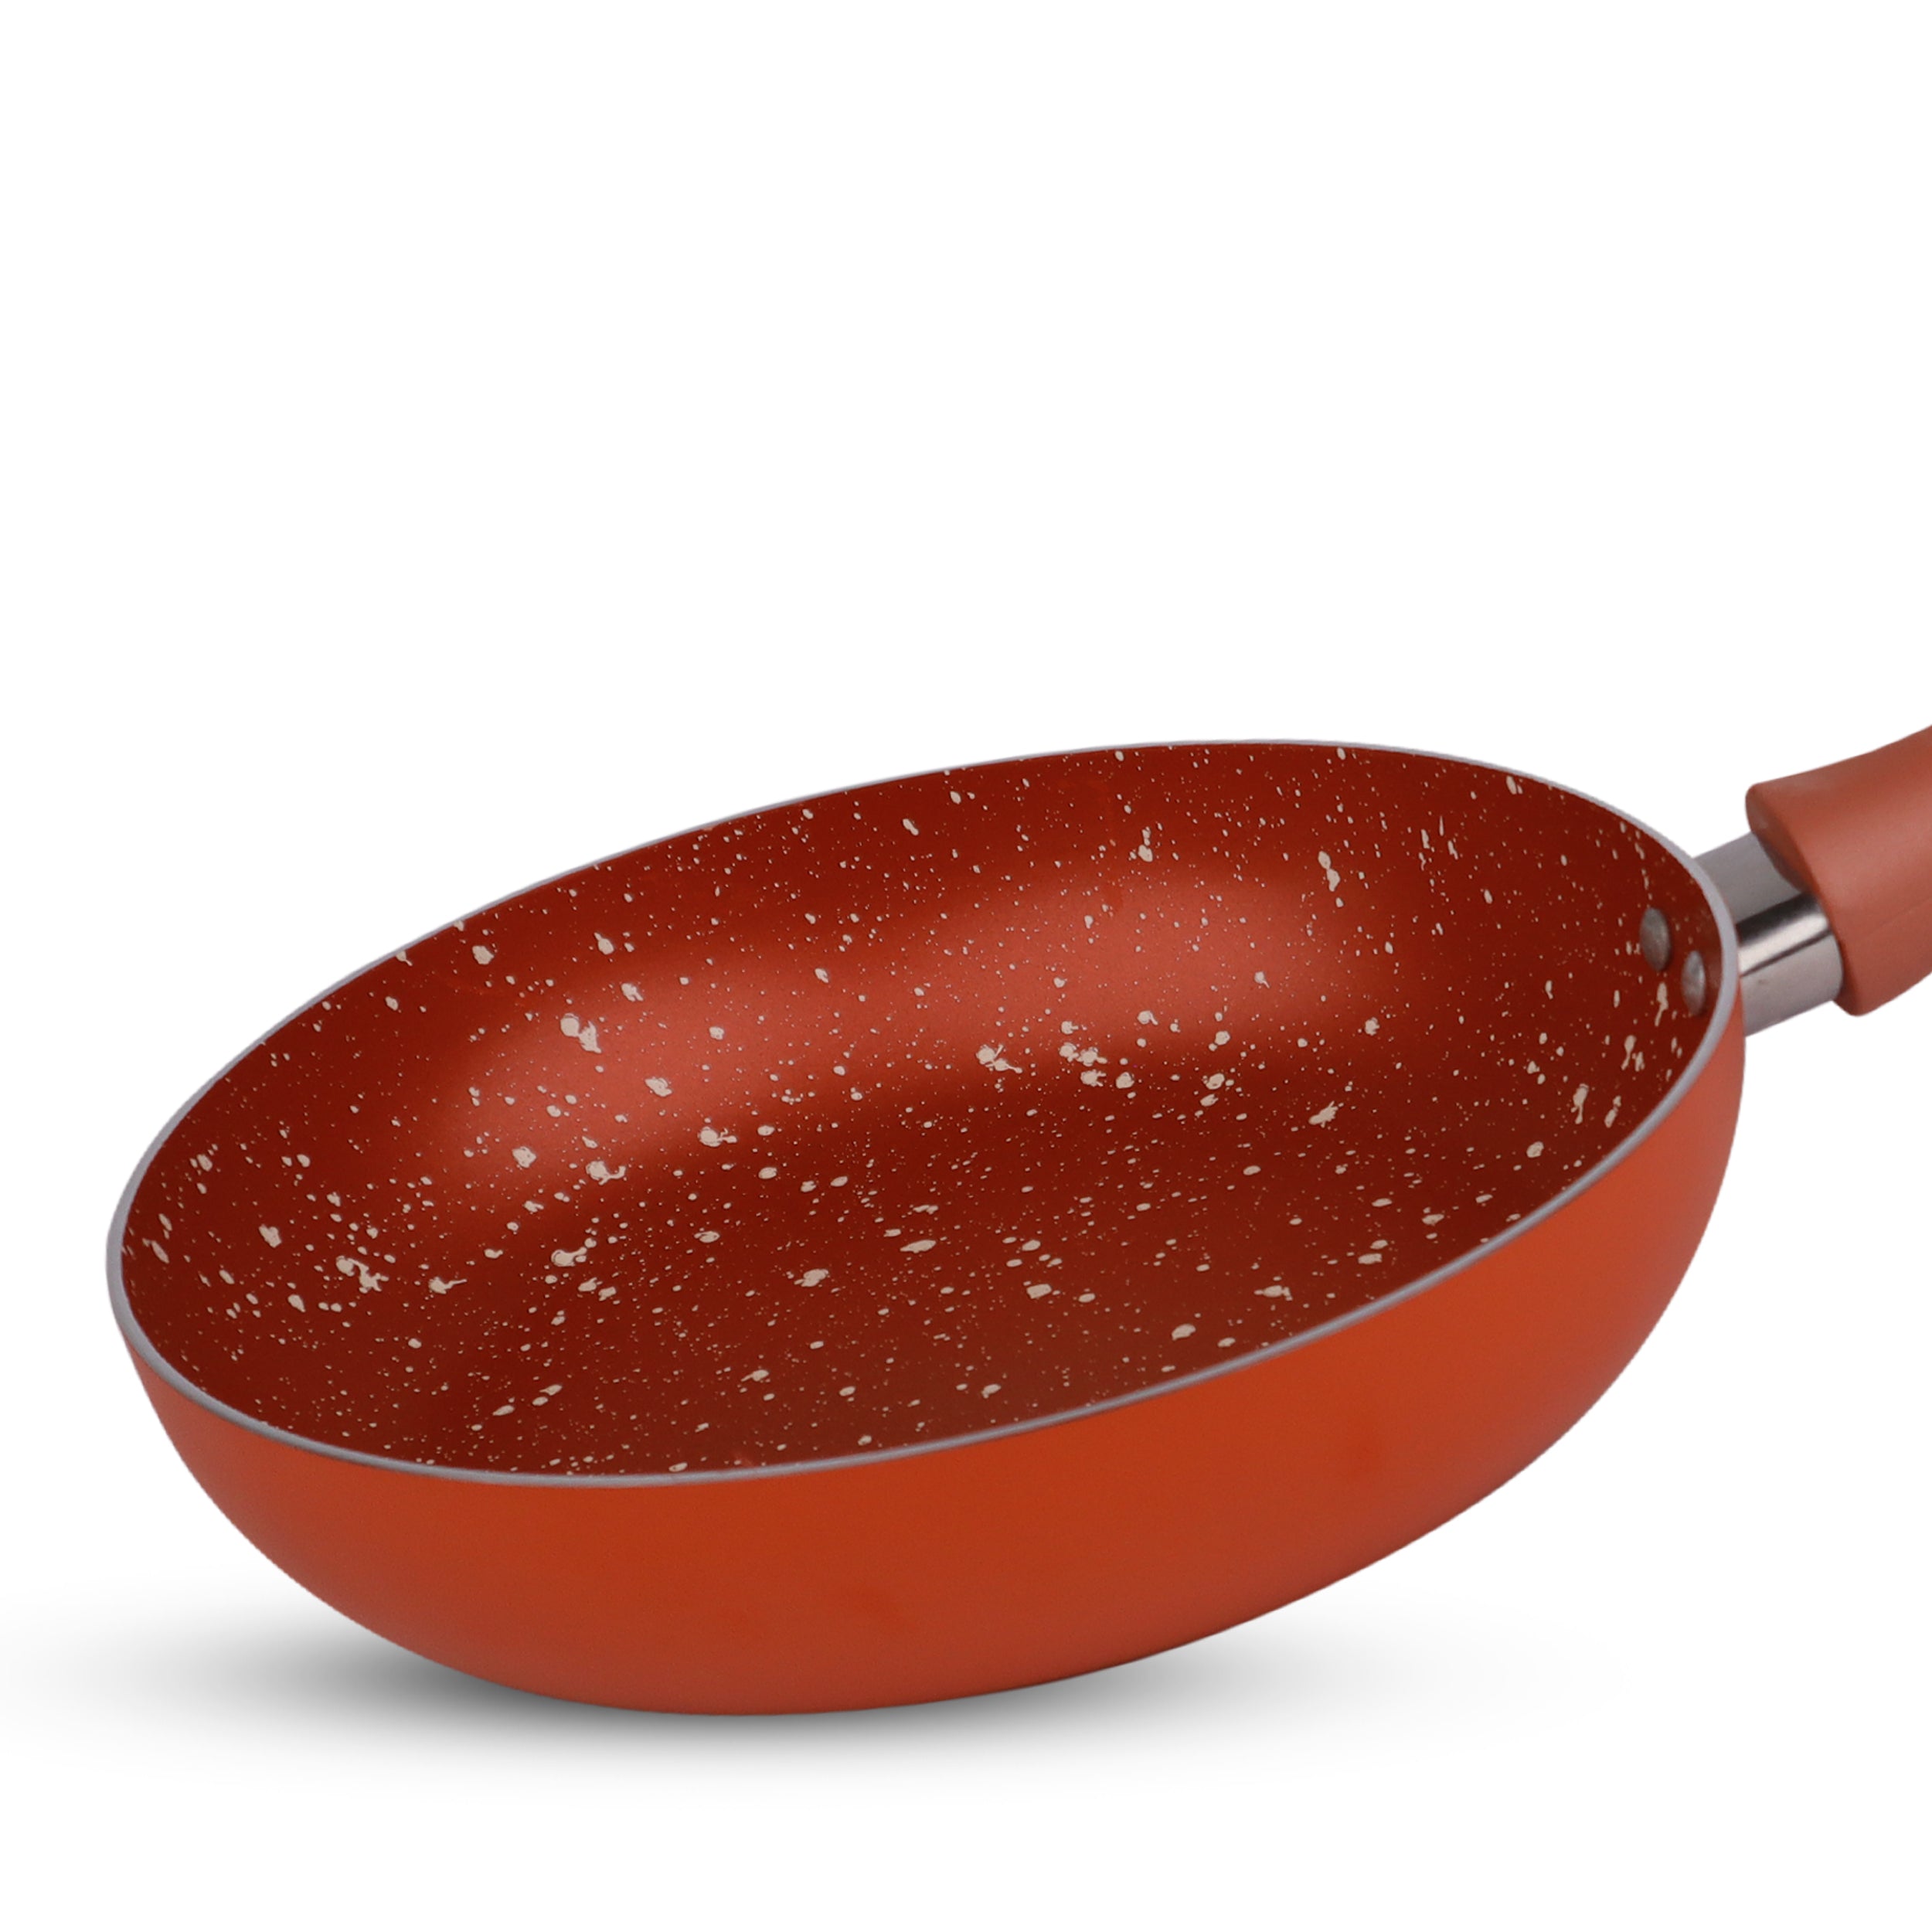 Chef Granito Series 3 Layer Marble Coating Nonstick Fry Pan 24cm - Copper